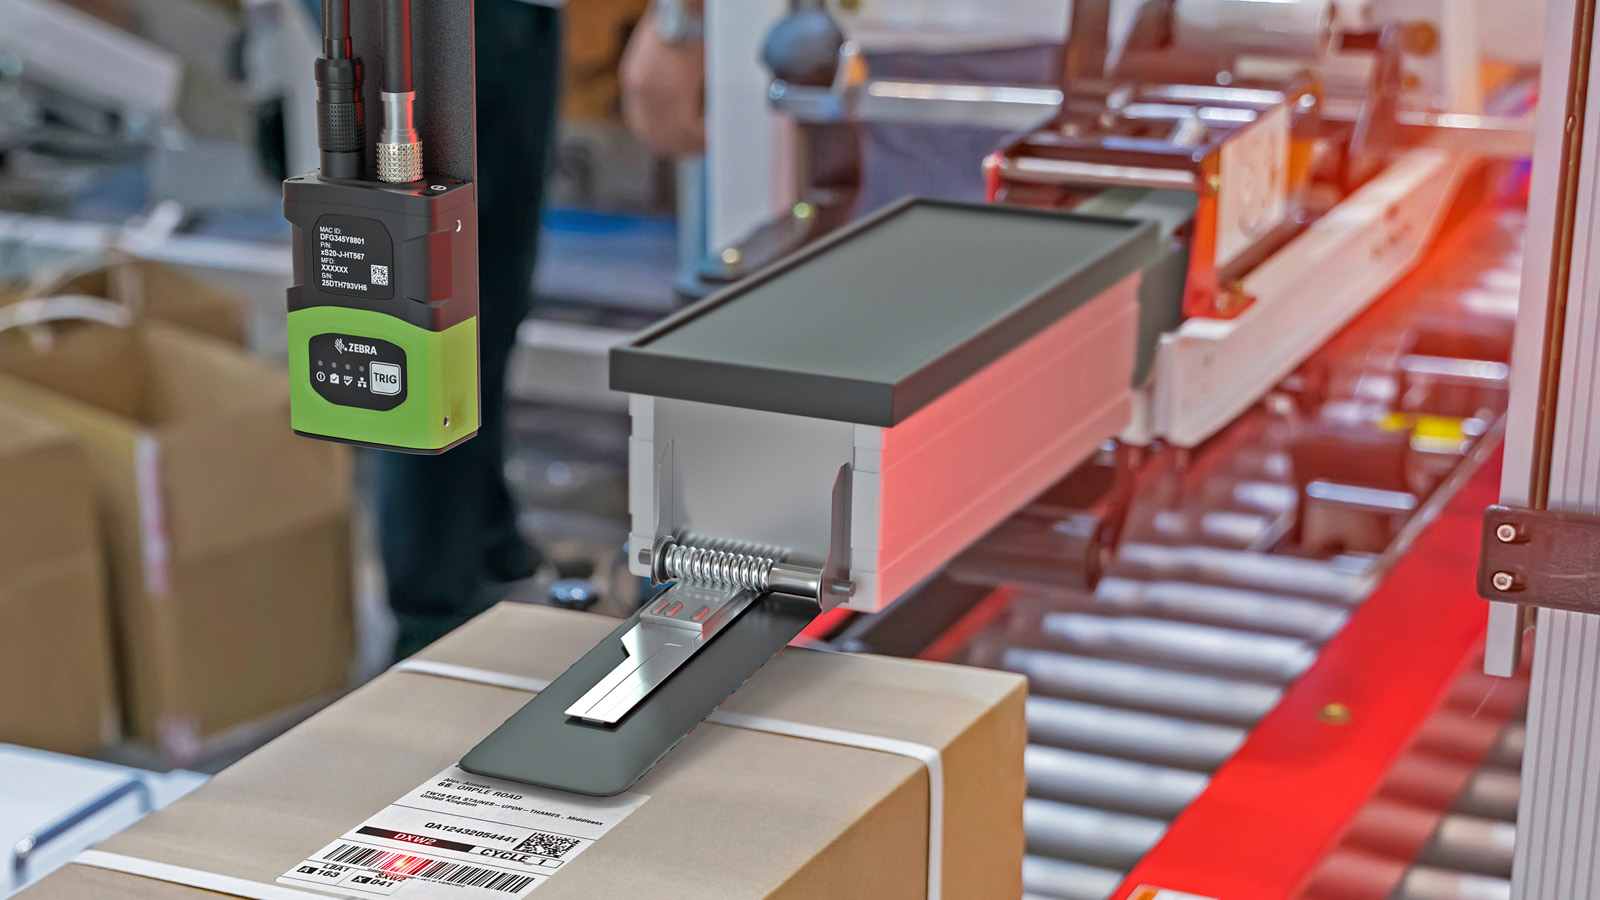 Machine vision powered by deep learning is being used to detect and read a label on a cardboard box on a conveyor system in a packaging facility.